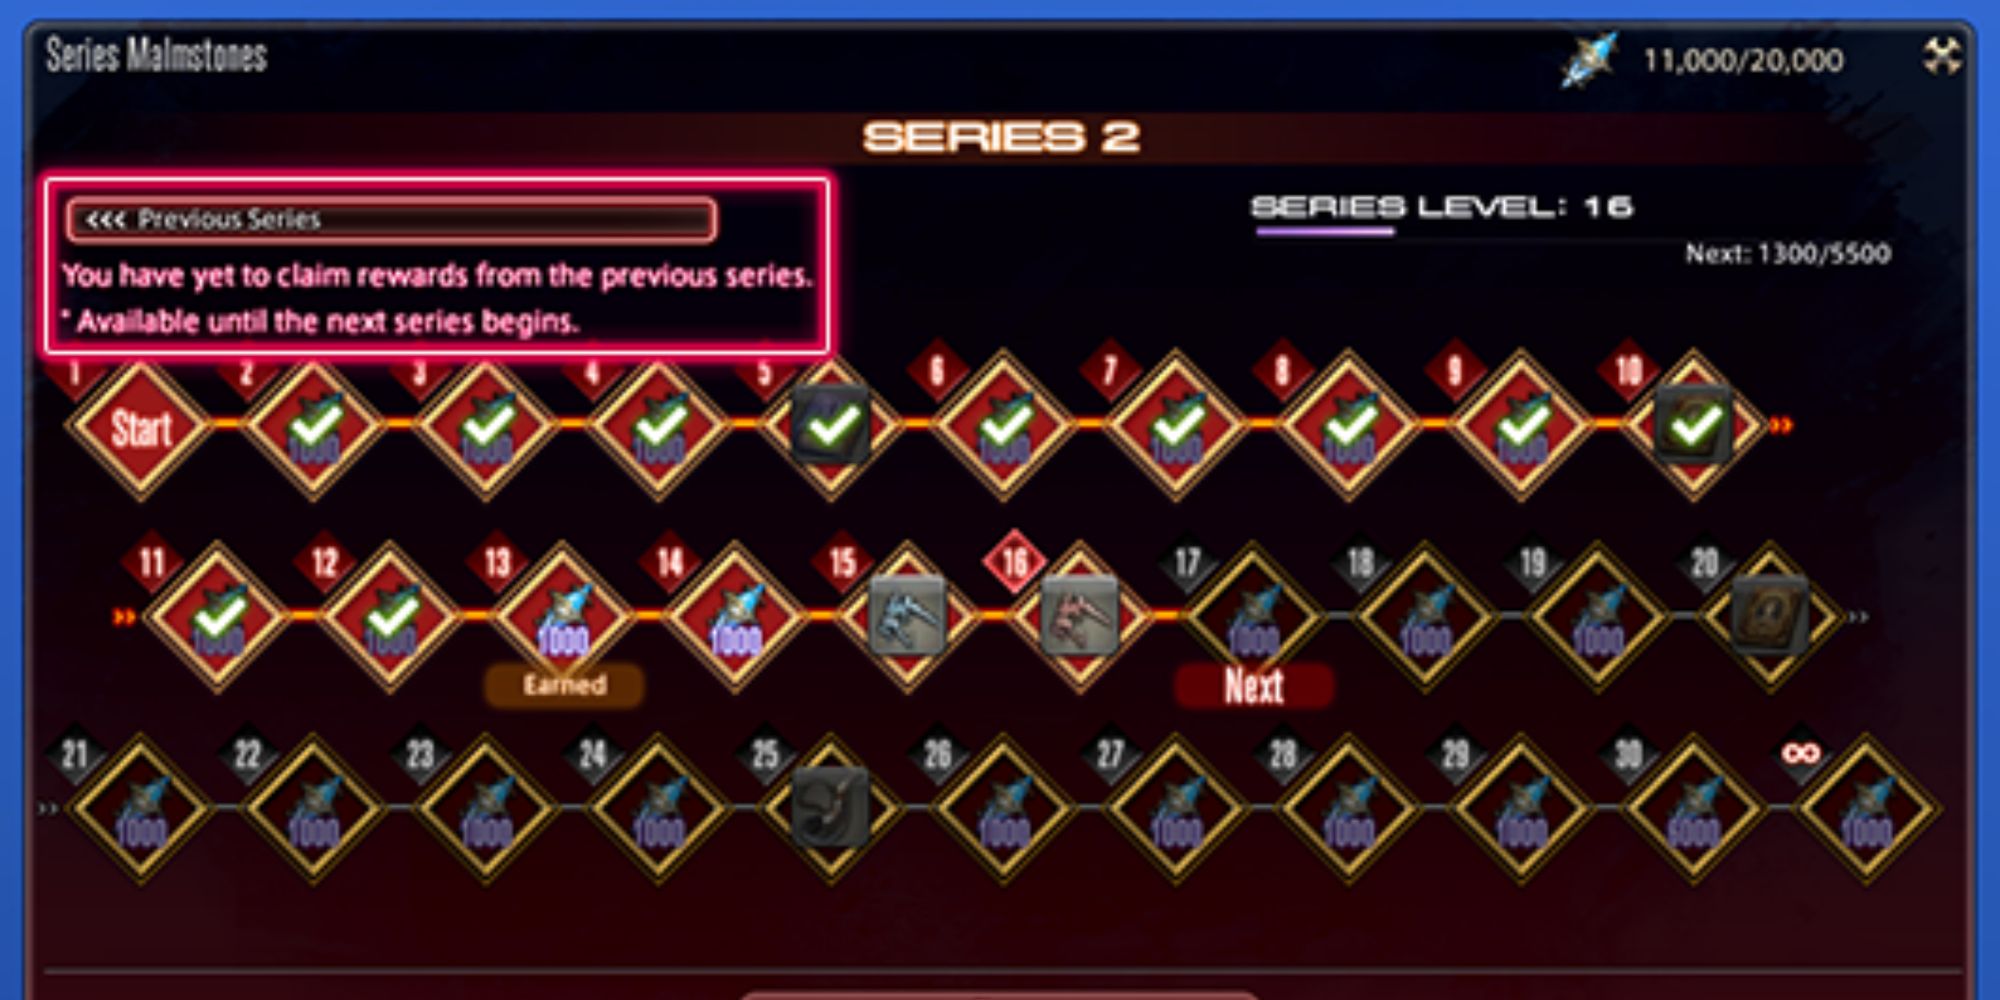 The Series Malmstone Menu. The boxed area highlights the button that allows you to access the Previous Series and claim previously earned, but unclaimed Items. This can be done every new PvP Series in Final Fantasy 14